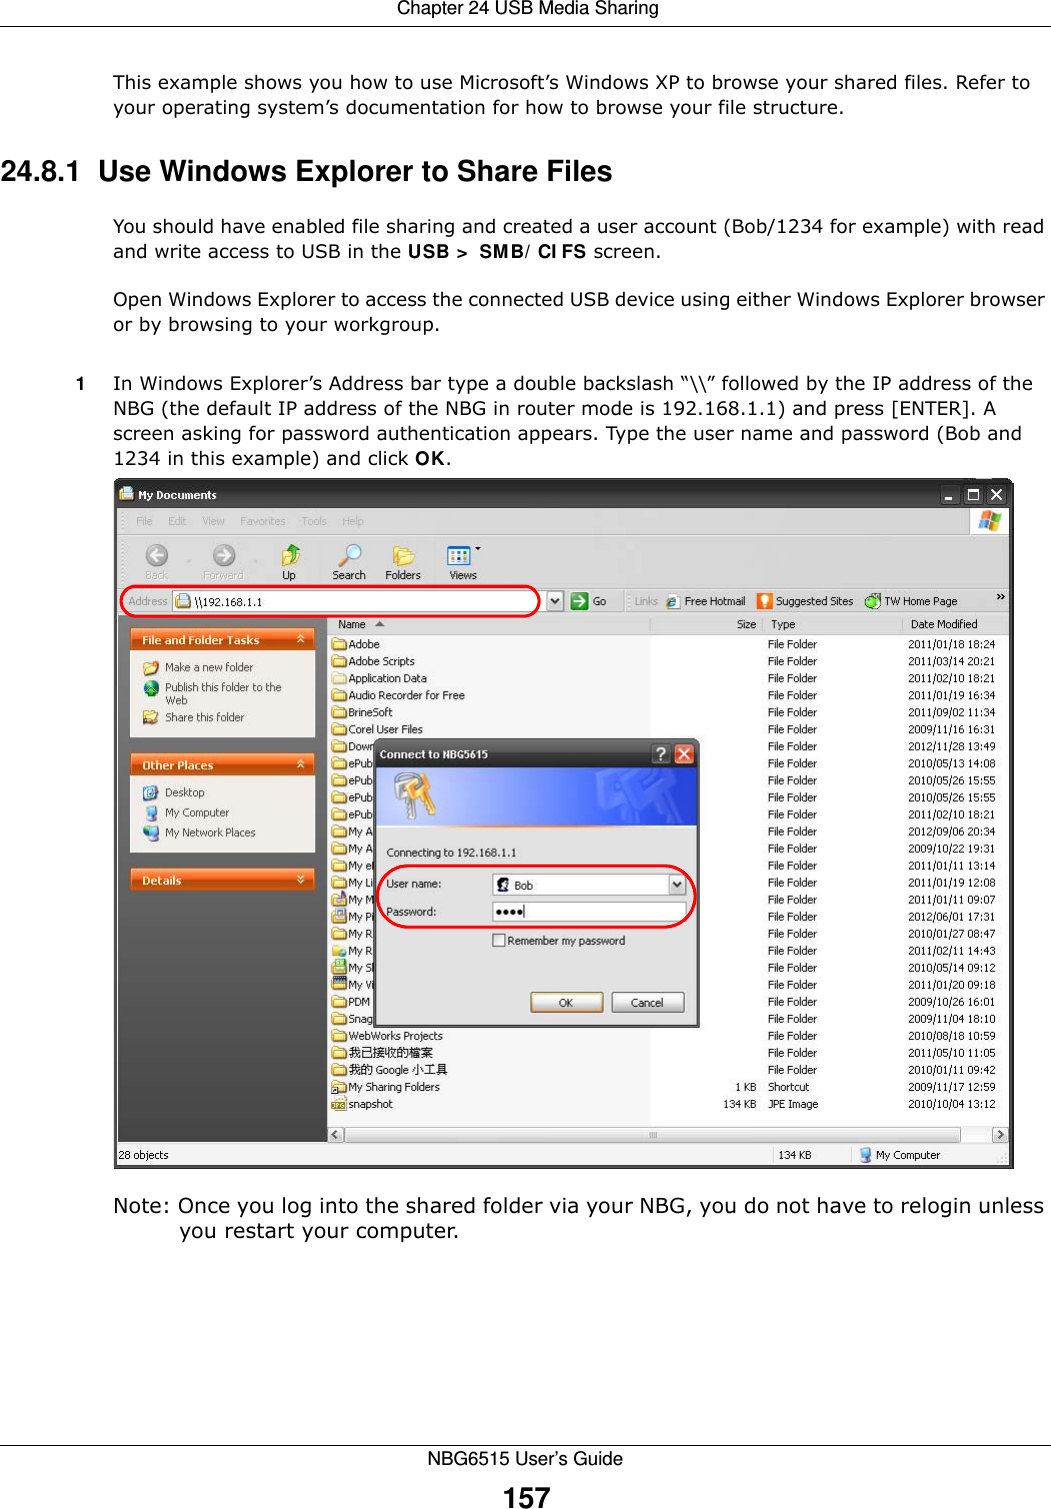  Chapter 24 USB Media SharingNBG6515 User’s Guide157This example shows you how to use Microsoft’s Windows XP to browse your shared files. Refer to your operating system’s documentation for how to browse your file structure. 24.8.1  Use Windows Explorer to Share Files You should have enabled file sharing and created a user account (Bob/1234 for example) with read and write access to USB in the USB &gt; SMB/CIFS screen.Open Windows Explorer to access the connected USB device using either Windows Explorer browser or by browsing to your workgroup.1In Windows Explorer’s Address bar type a double backslash “\\” followed by the IP address of the NBG (the default IP address of the NBG in router mode is 192.168.1.1) and press [ENTER]. A screen asking for password authentication appears. Type the user name and password (Bob and 1234 in this example) and click OK.Note: Once you log into the shared folder via your NBG, you do not have to relogin unless you restart your computer. 